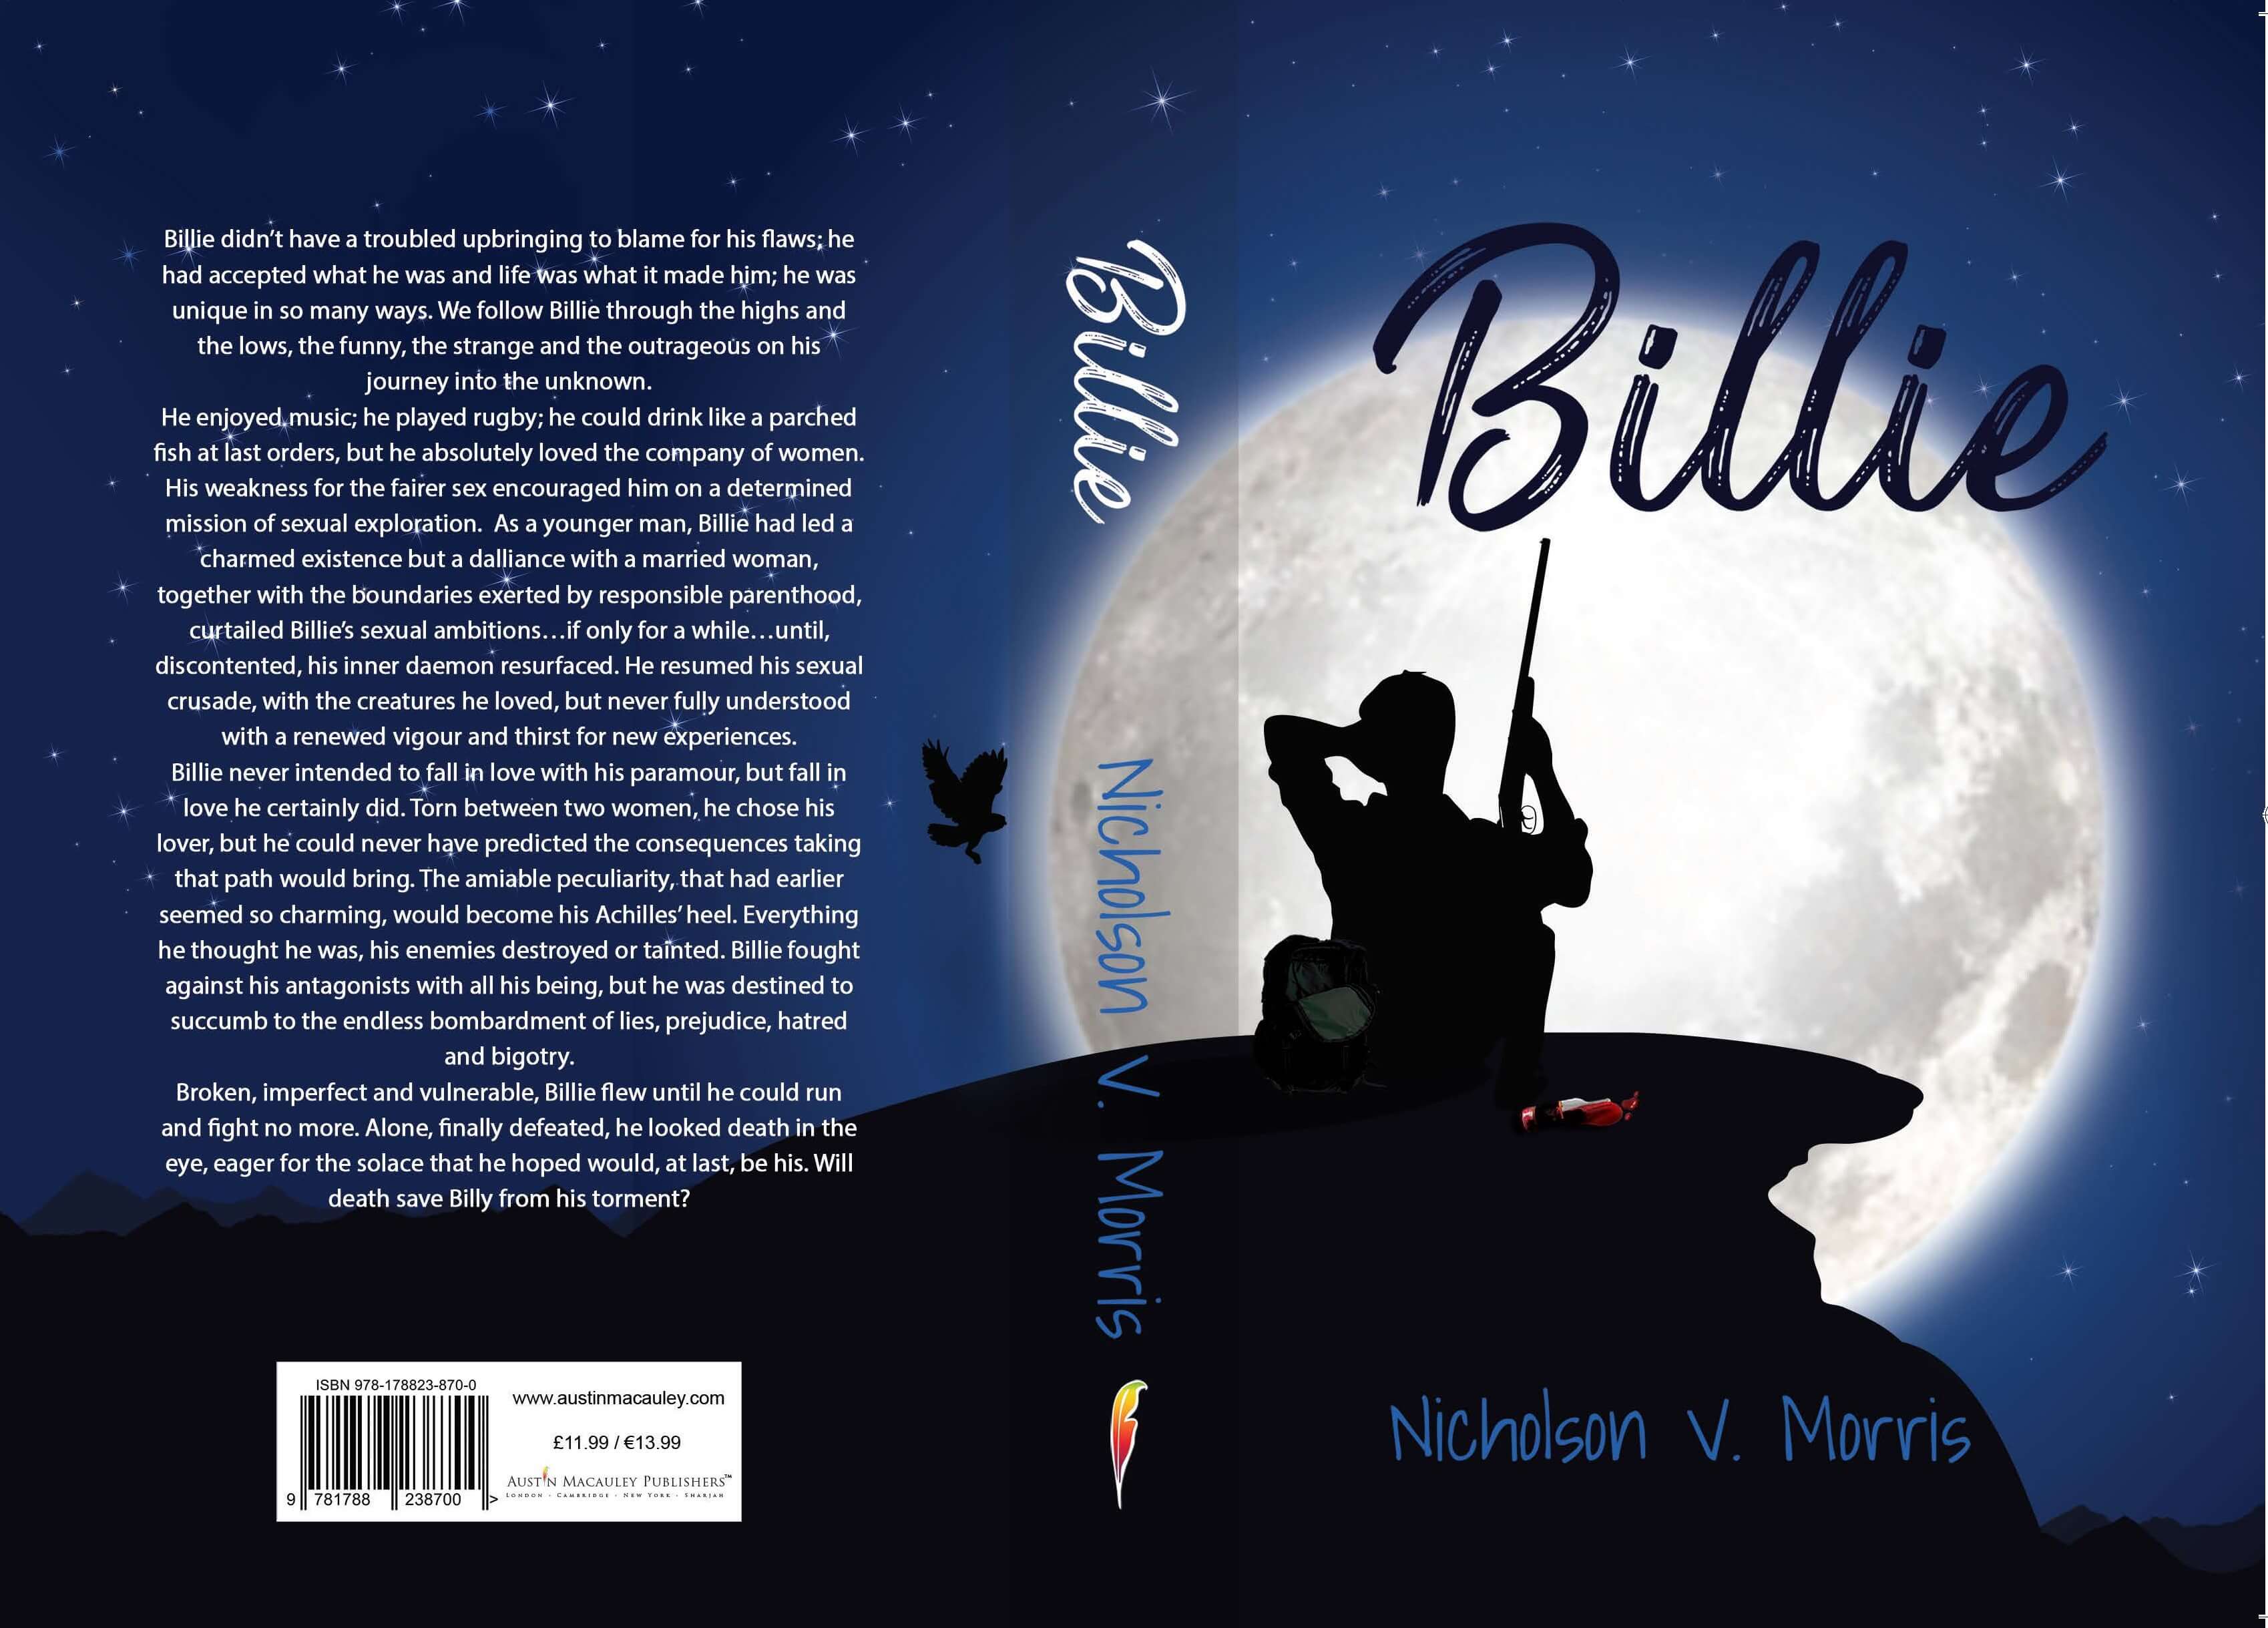 The front and back of the Billie book